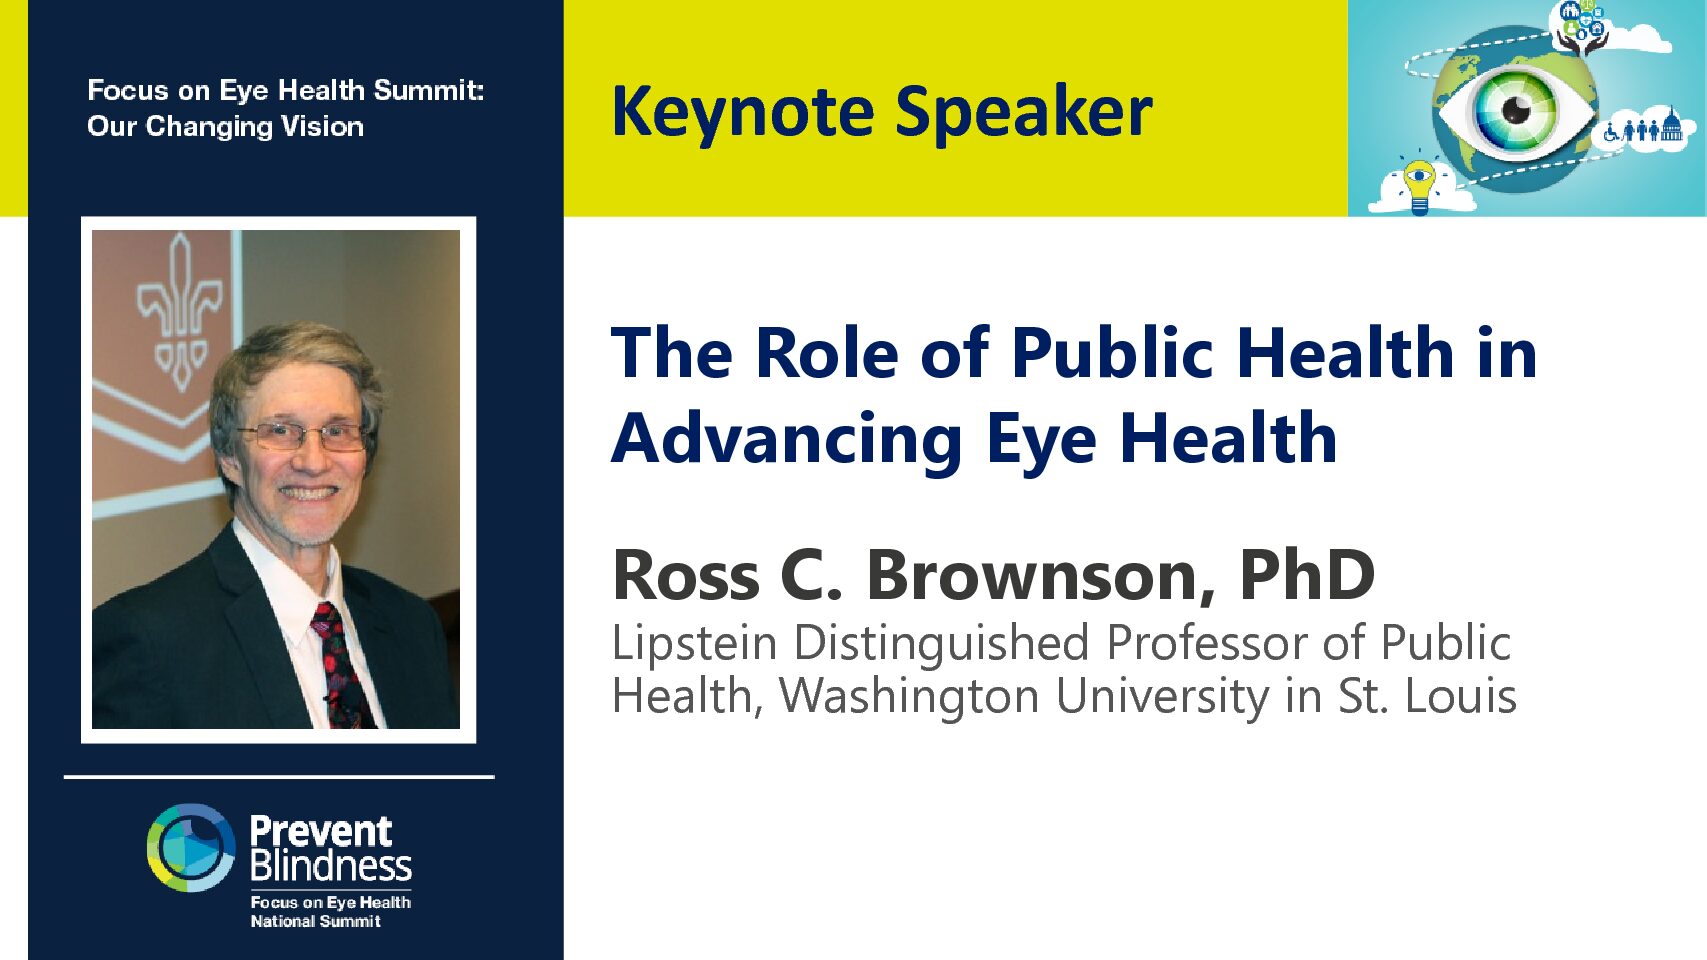 The Role of Public Health in Advancing Eye Health